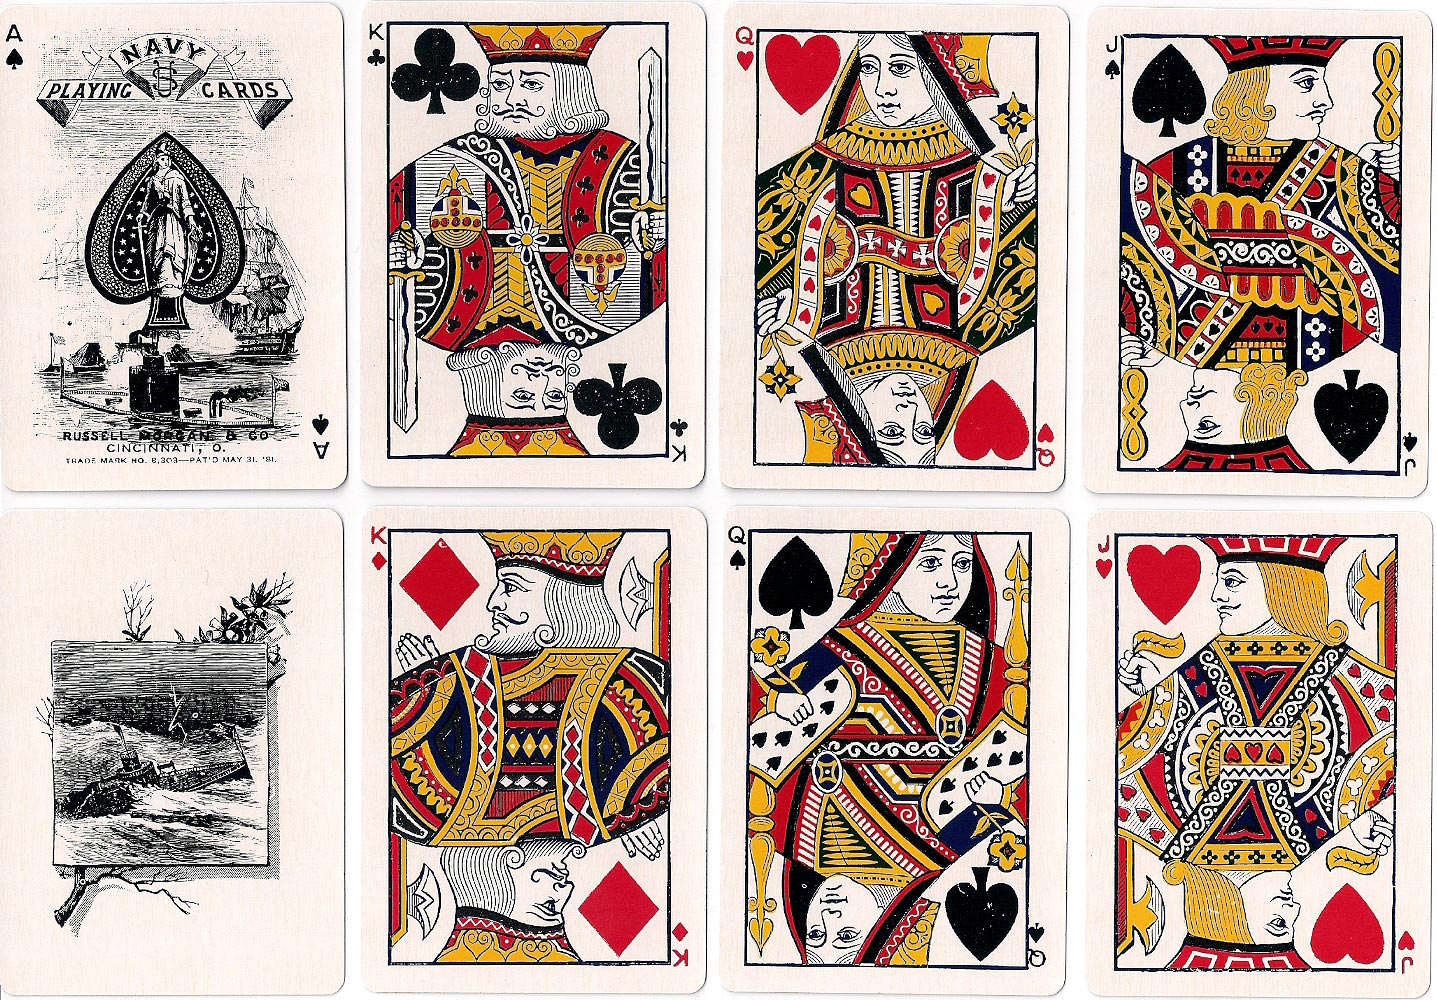 'Navy No.303' playing cards, Russell, Morgan & Co., c.1881